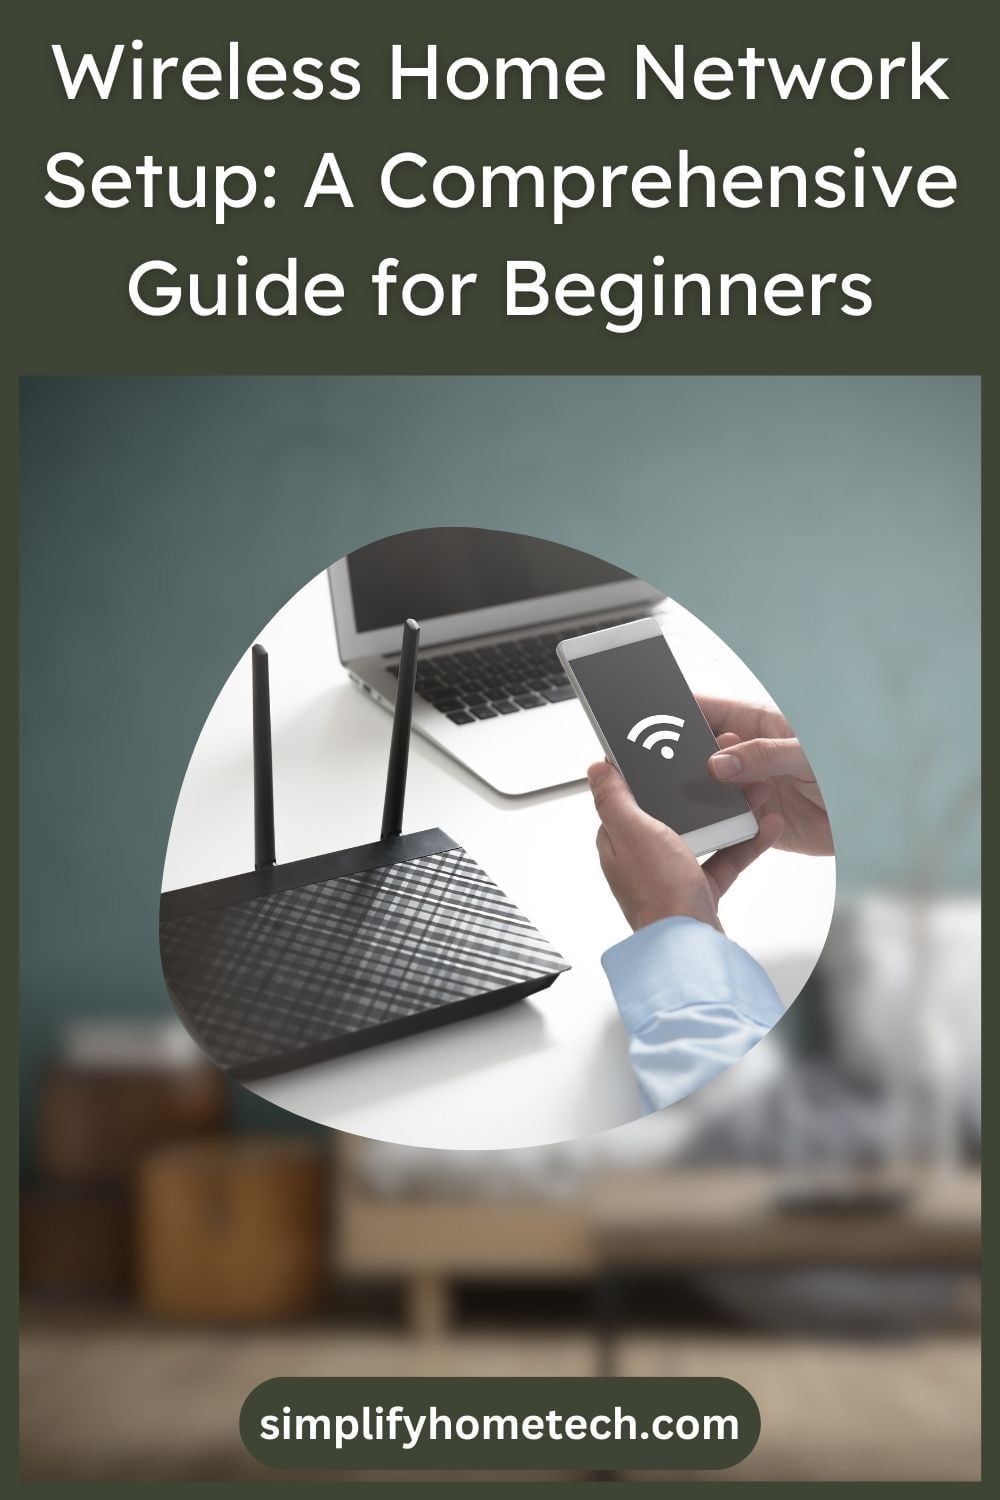 Wireless Home Network Setup Guide for Beginners